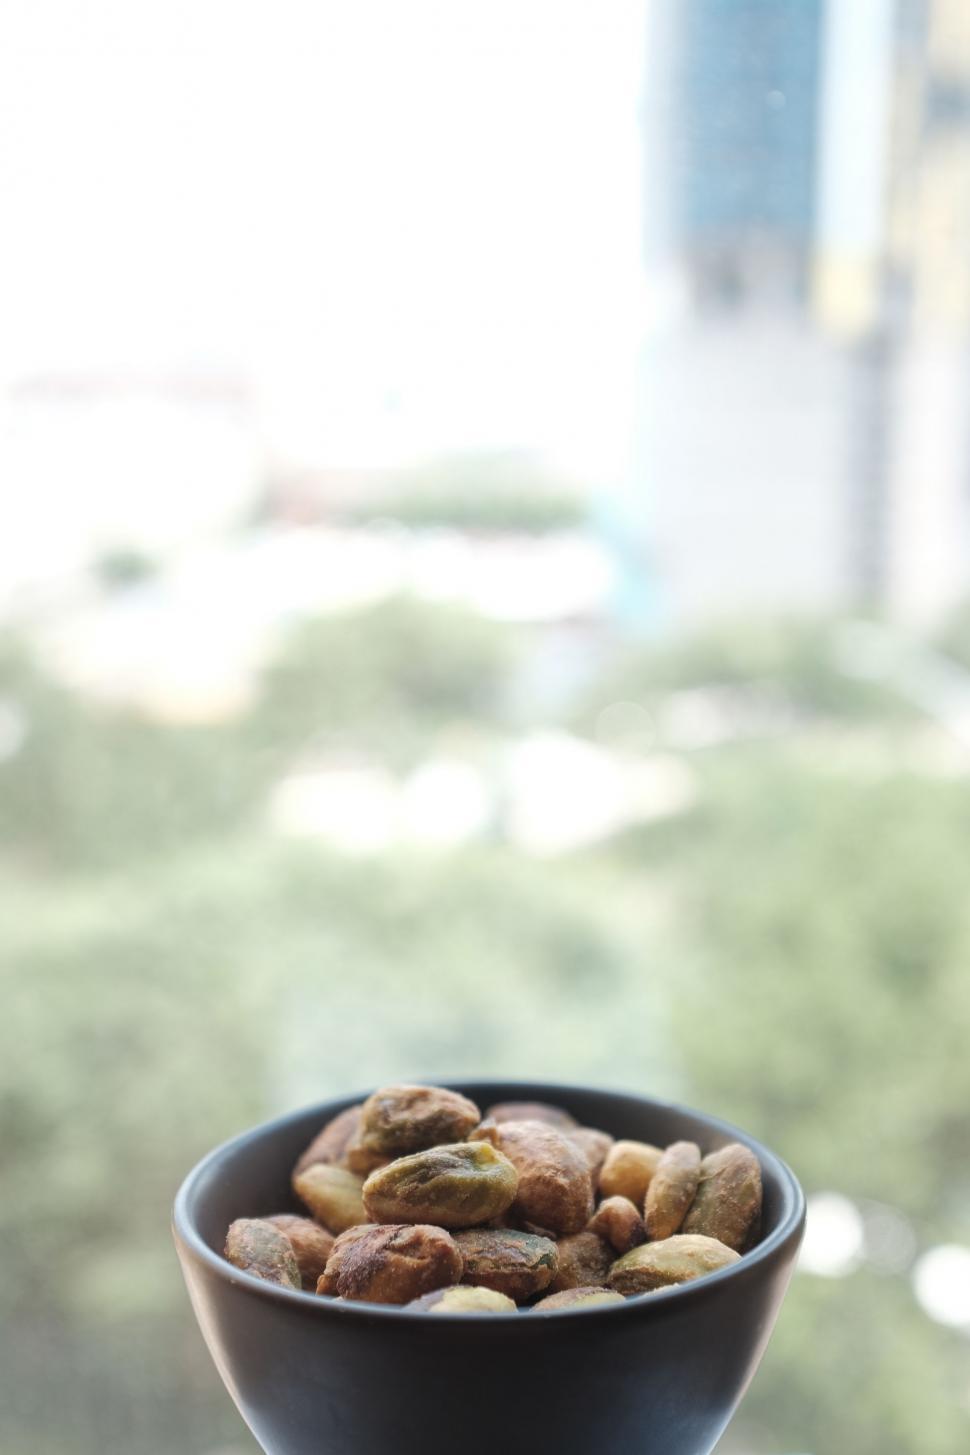 Free Image of Black Bowl Filled With Nuts on Table 